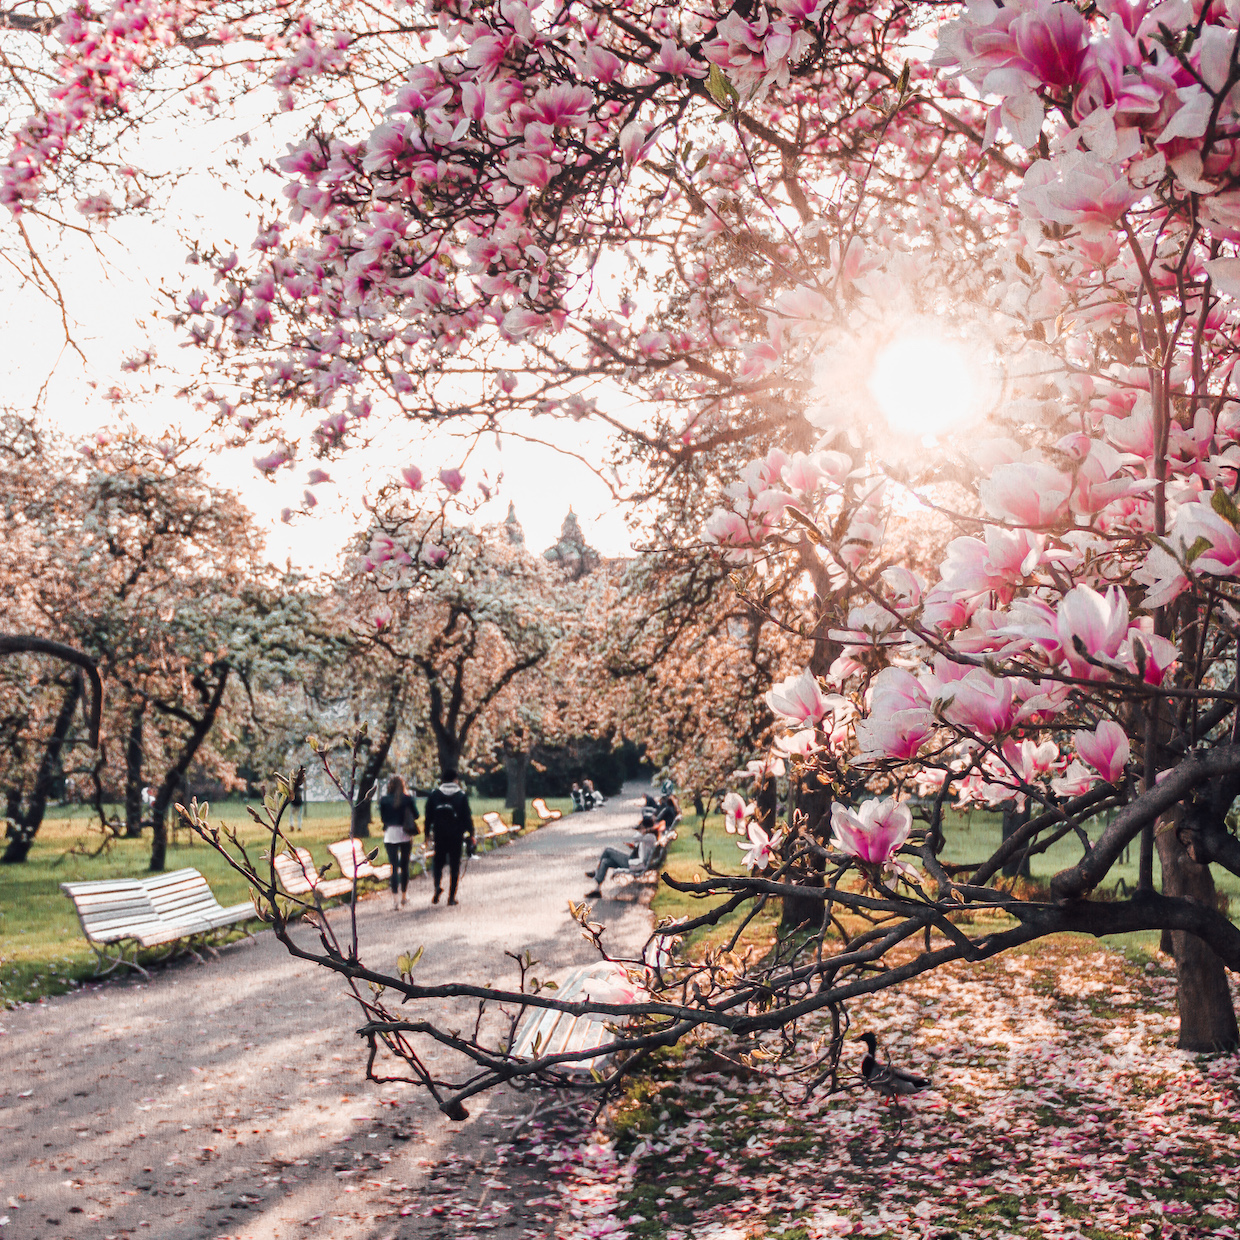 Where to view cherry blossoms in Europe